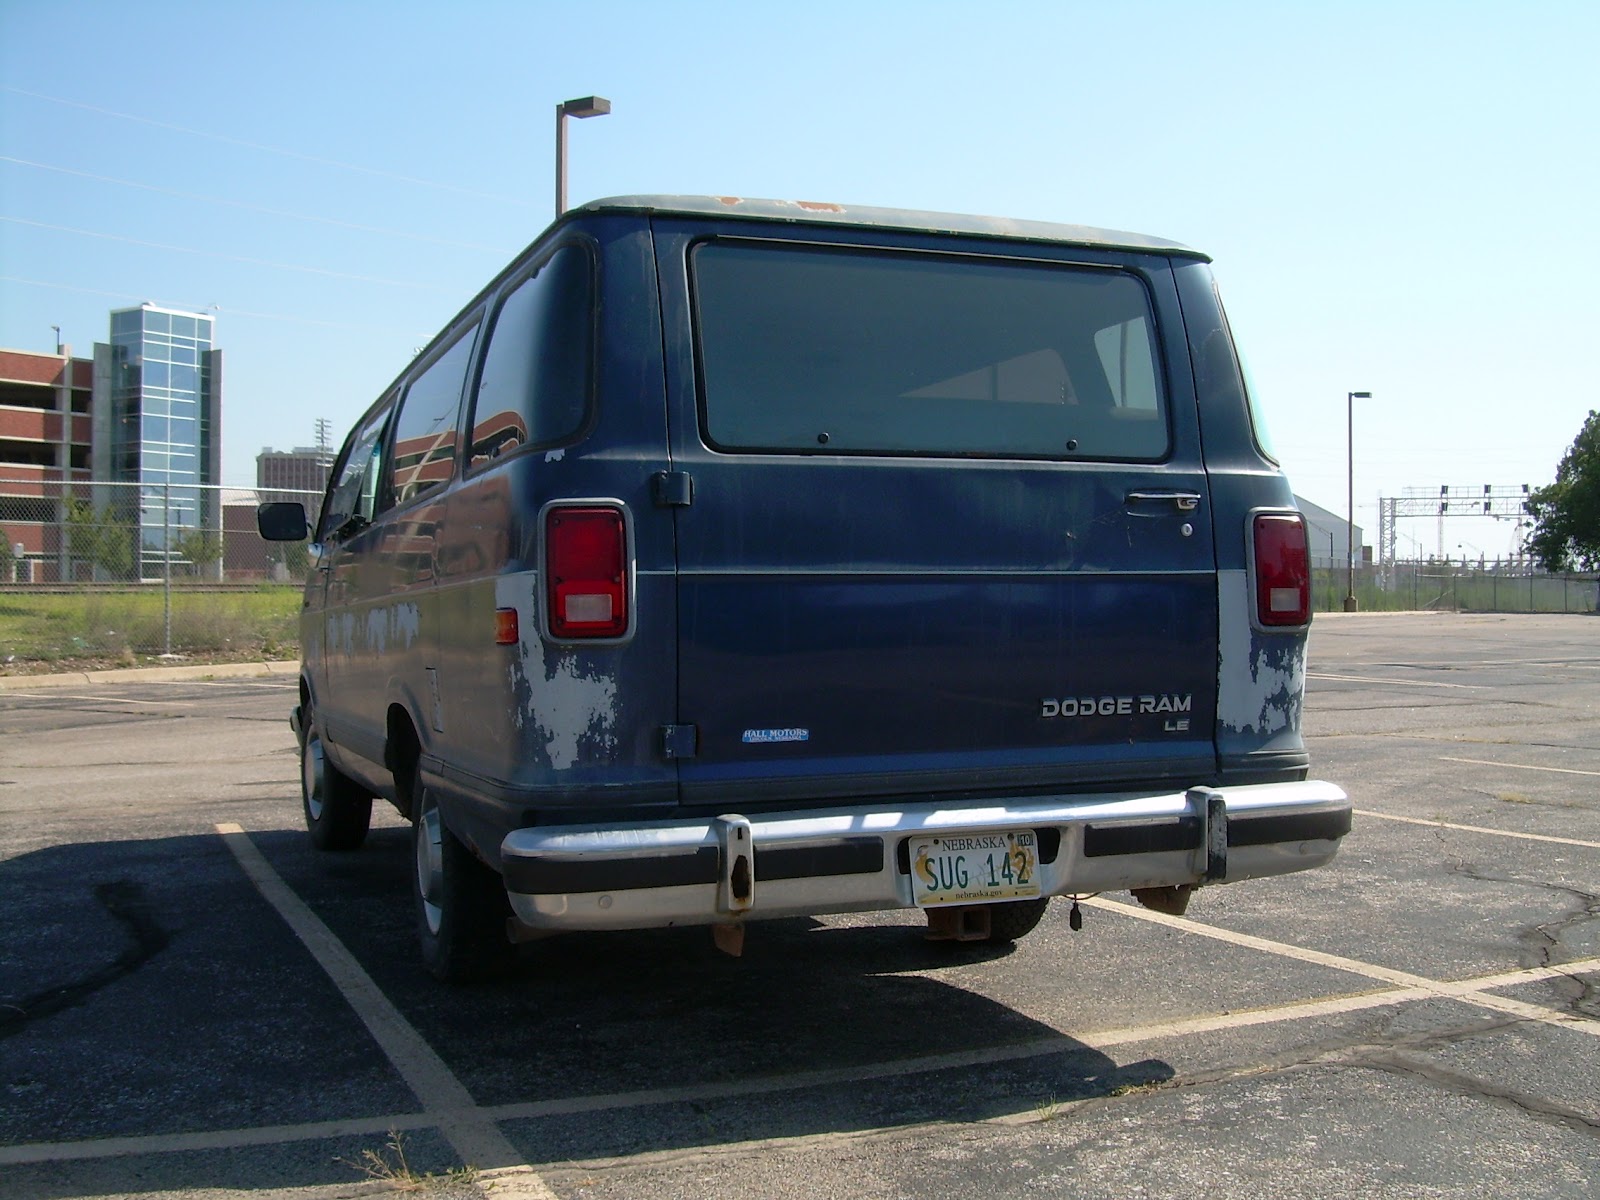 1993 Dodge Ram Van 350 LE. Posted by Michael at 9:12 PM